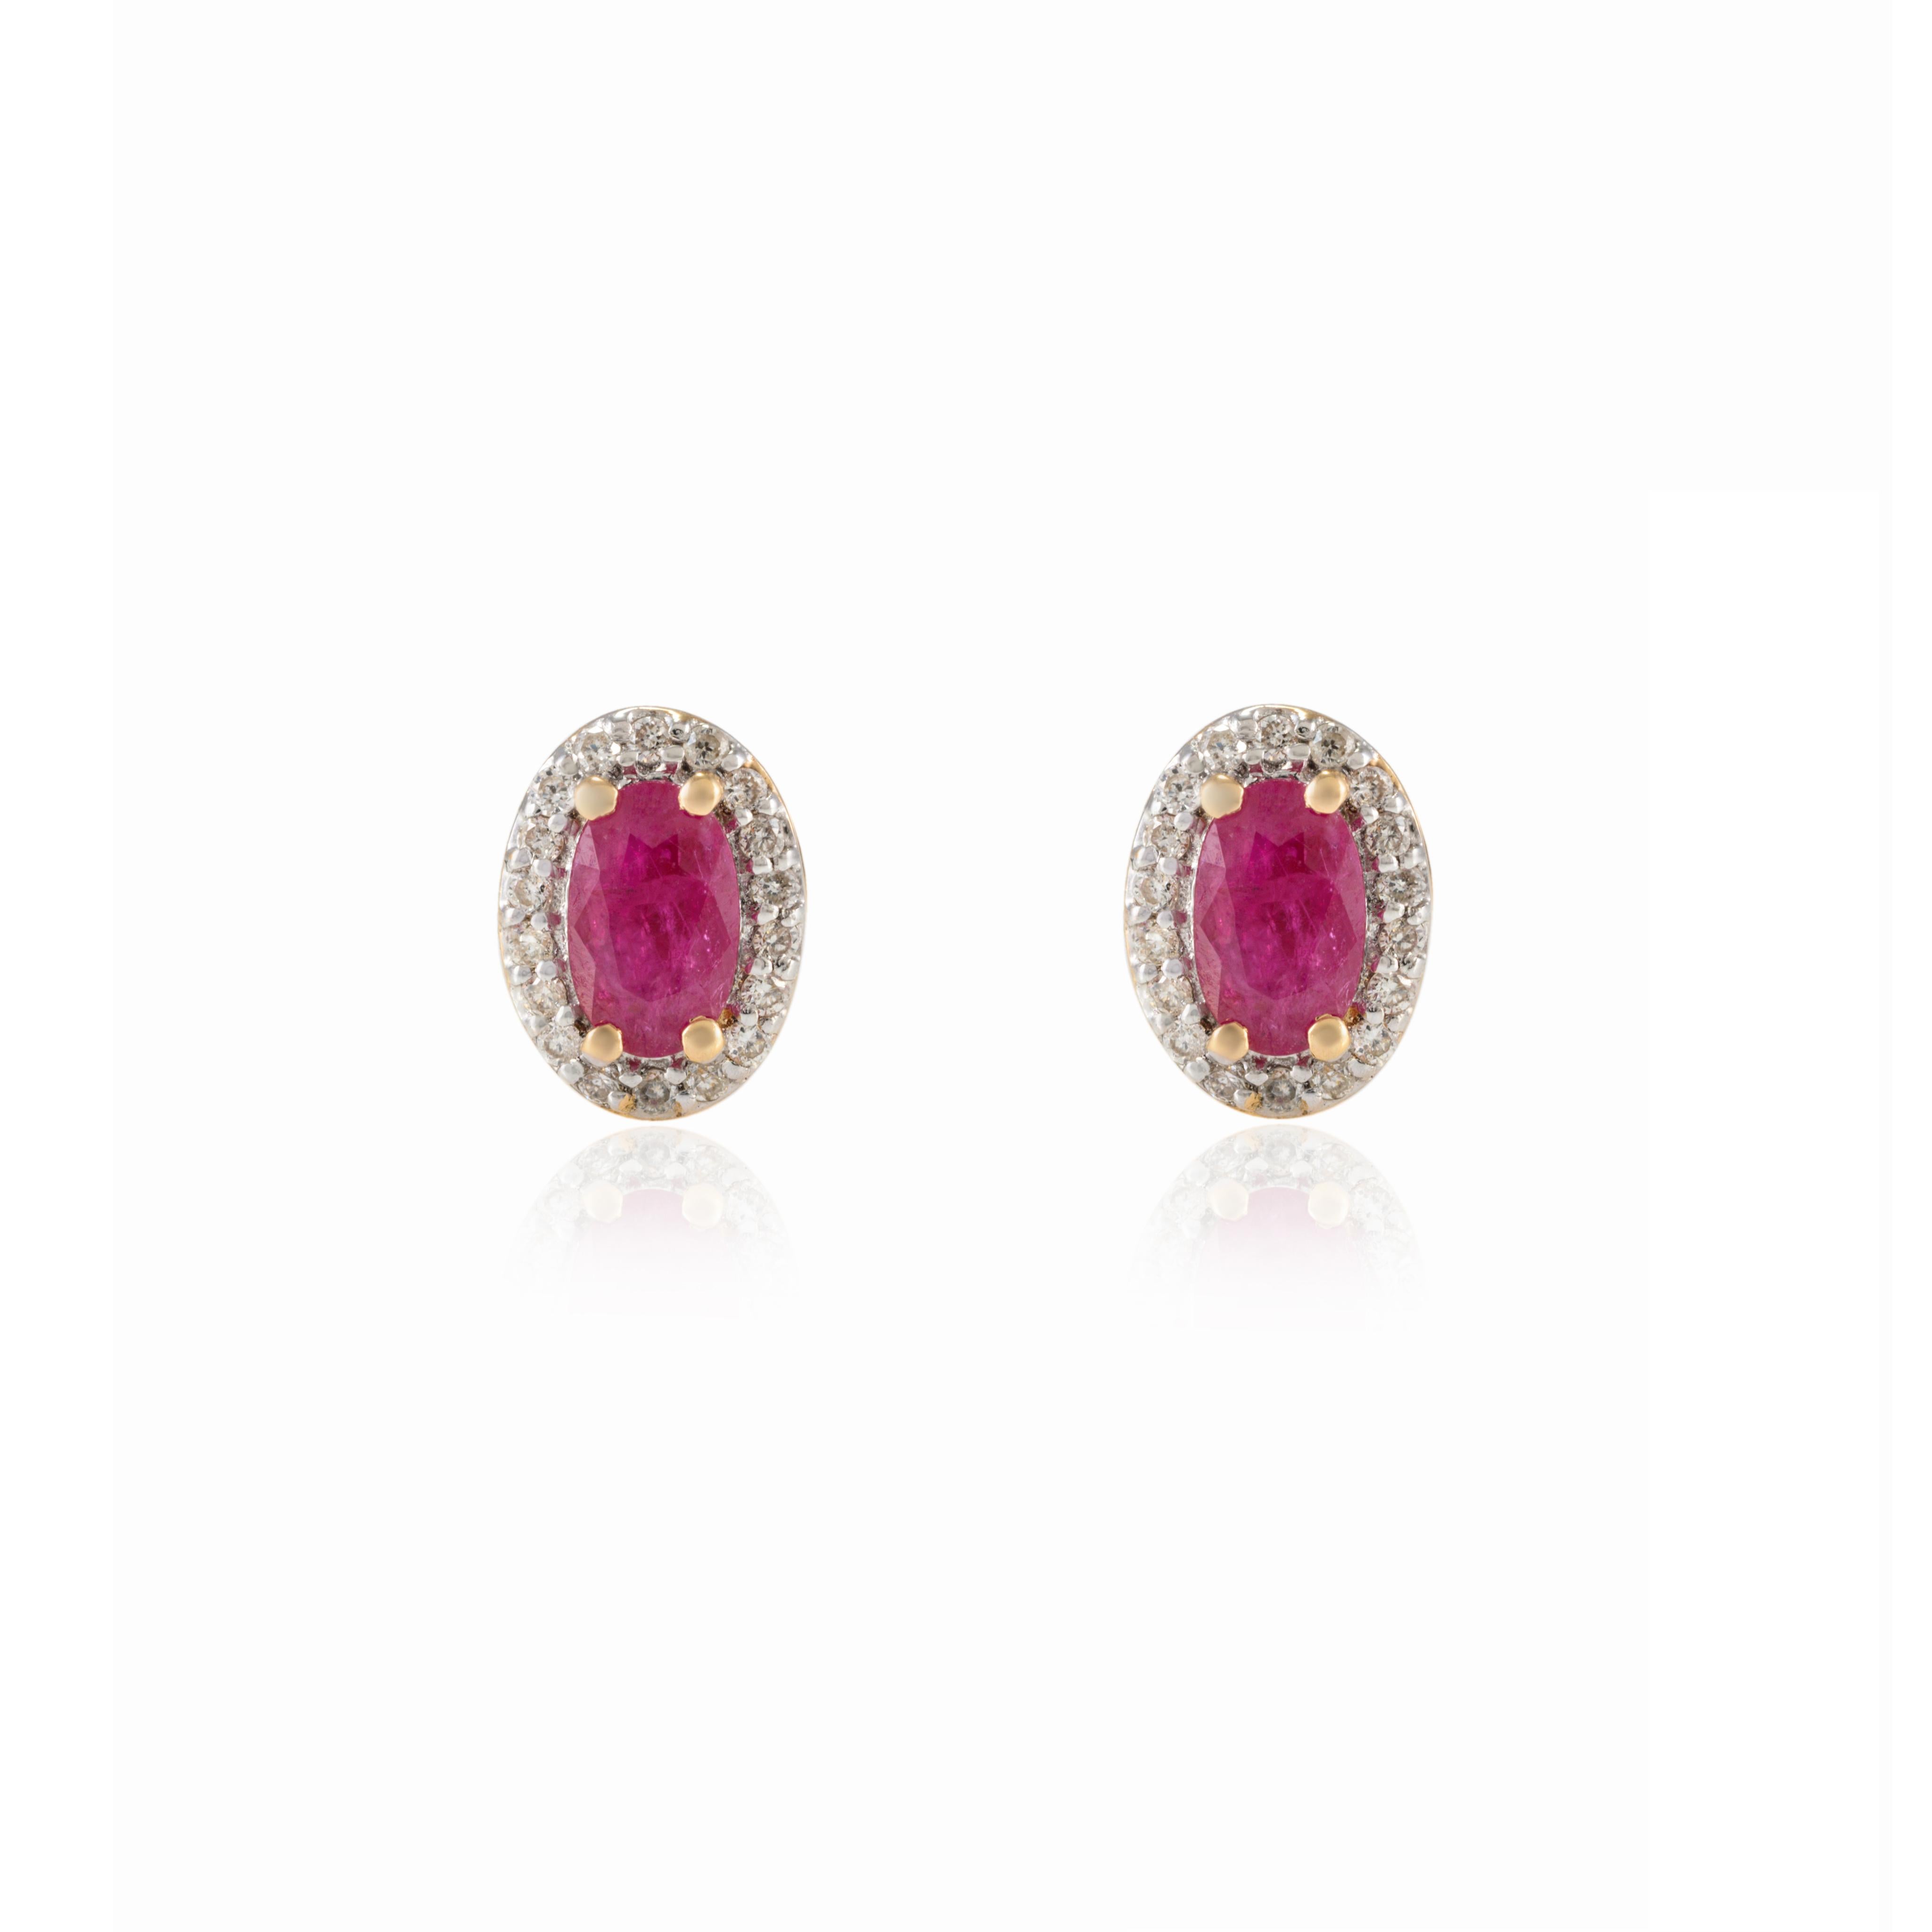 Oval Diamond Halo and Ruby Stud Earrings in 18K Gold to make a statement with your look. You shall need stud earrings to make a statement with your look. These earrings create a sparkling, luxurious look featuring oval cut ruby and round cut